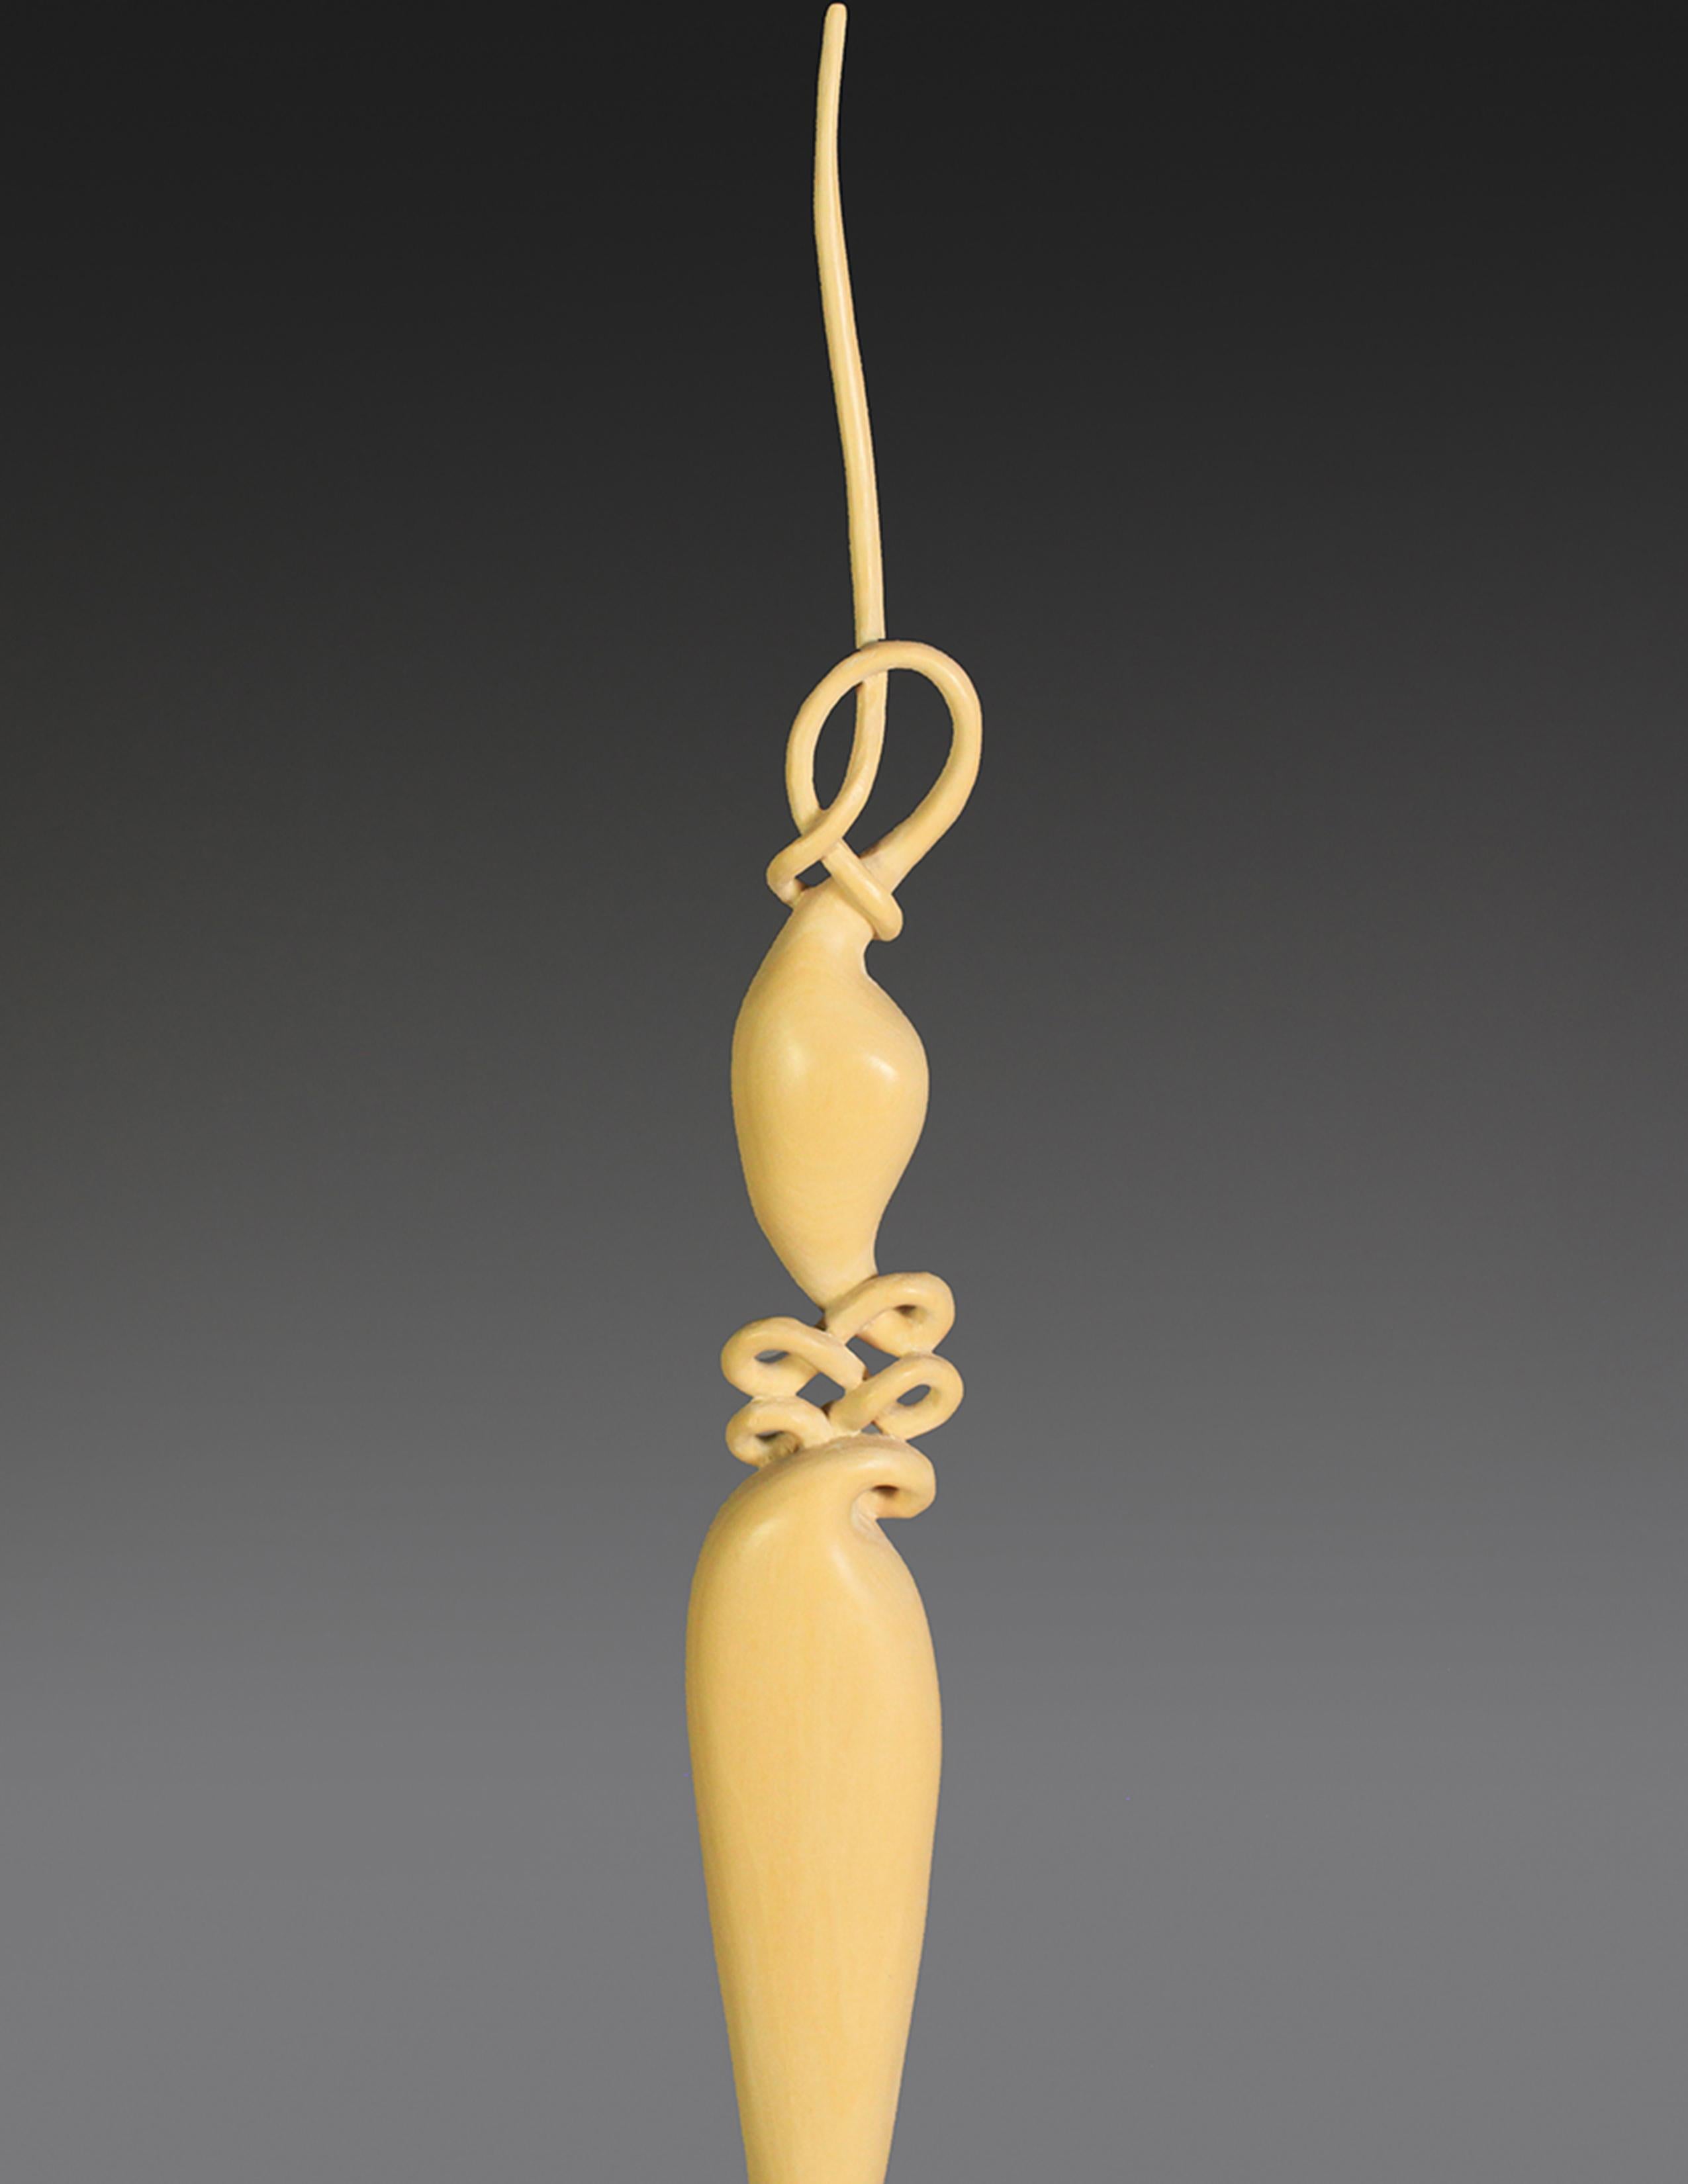 Woodwork Belly Dance I, Boxwood sculpture by Nairi Safaryan For Sale